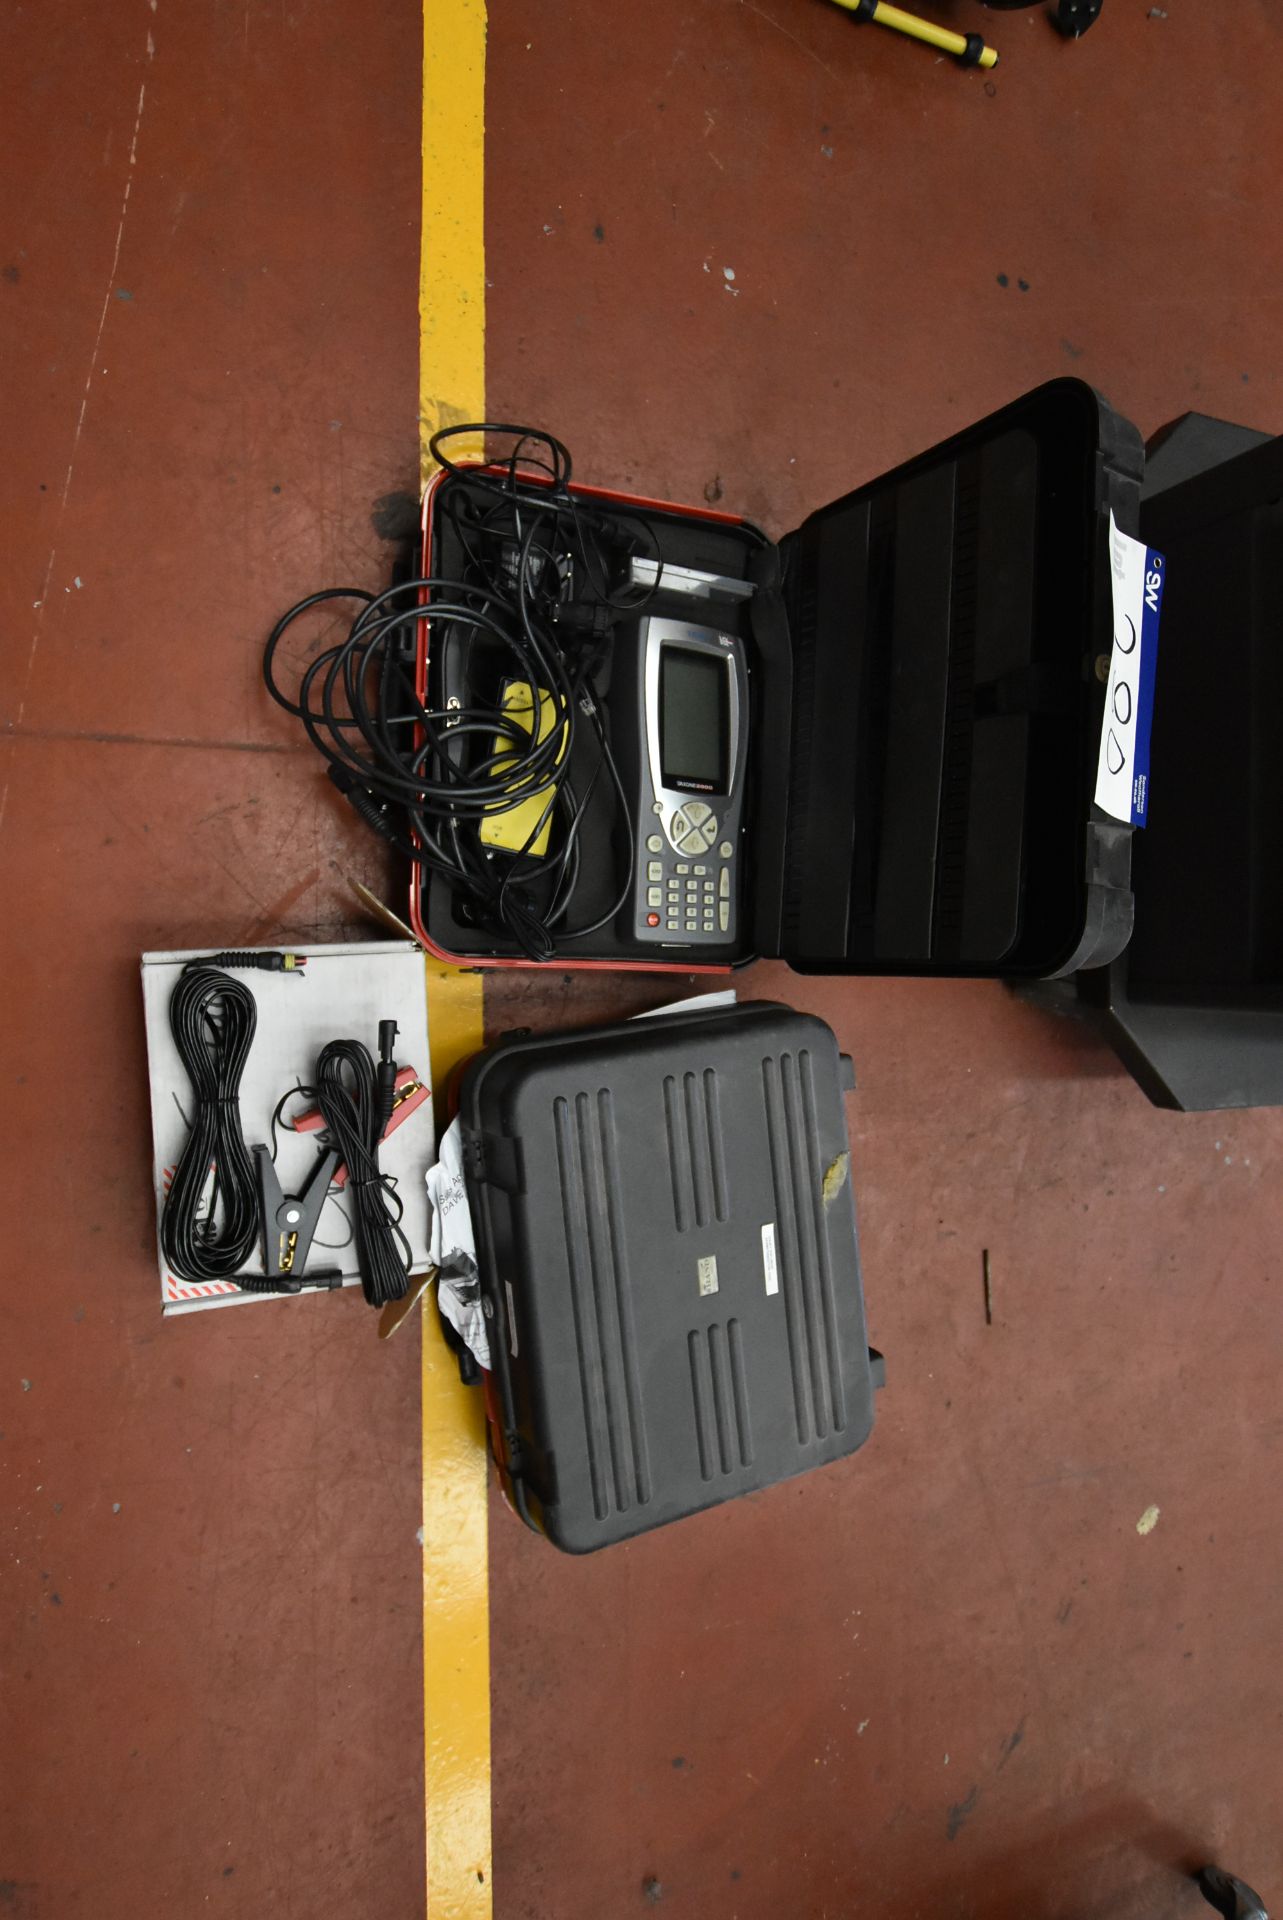 Texa Axone 2000 Test Unit, serial no. T94052, with